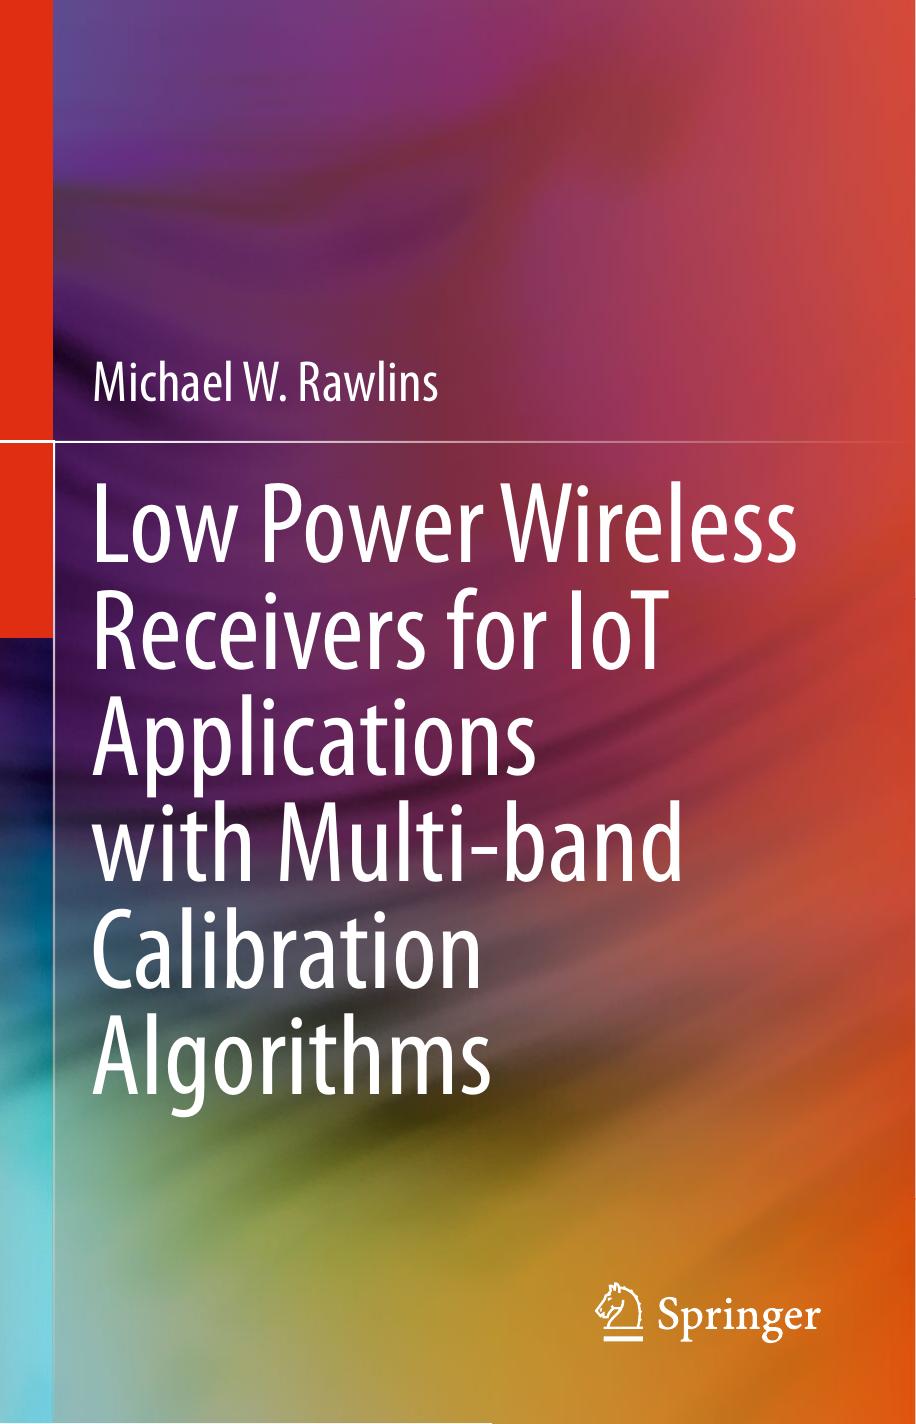 Low Power Wireless Receivers for IoT Applications with Multi-band Calibration Algorithms by Michael W. Rawlins